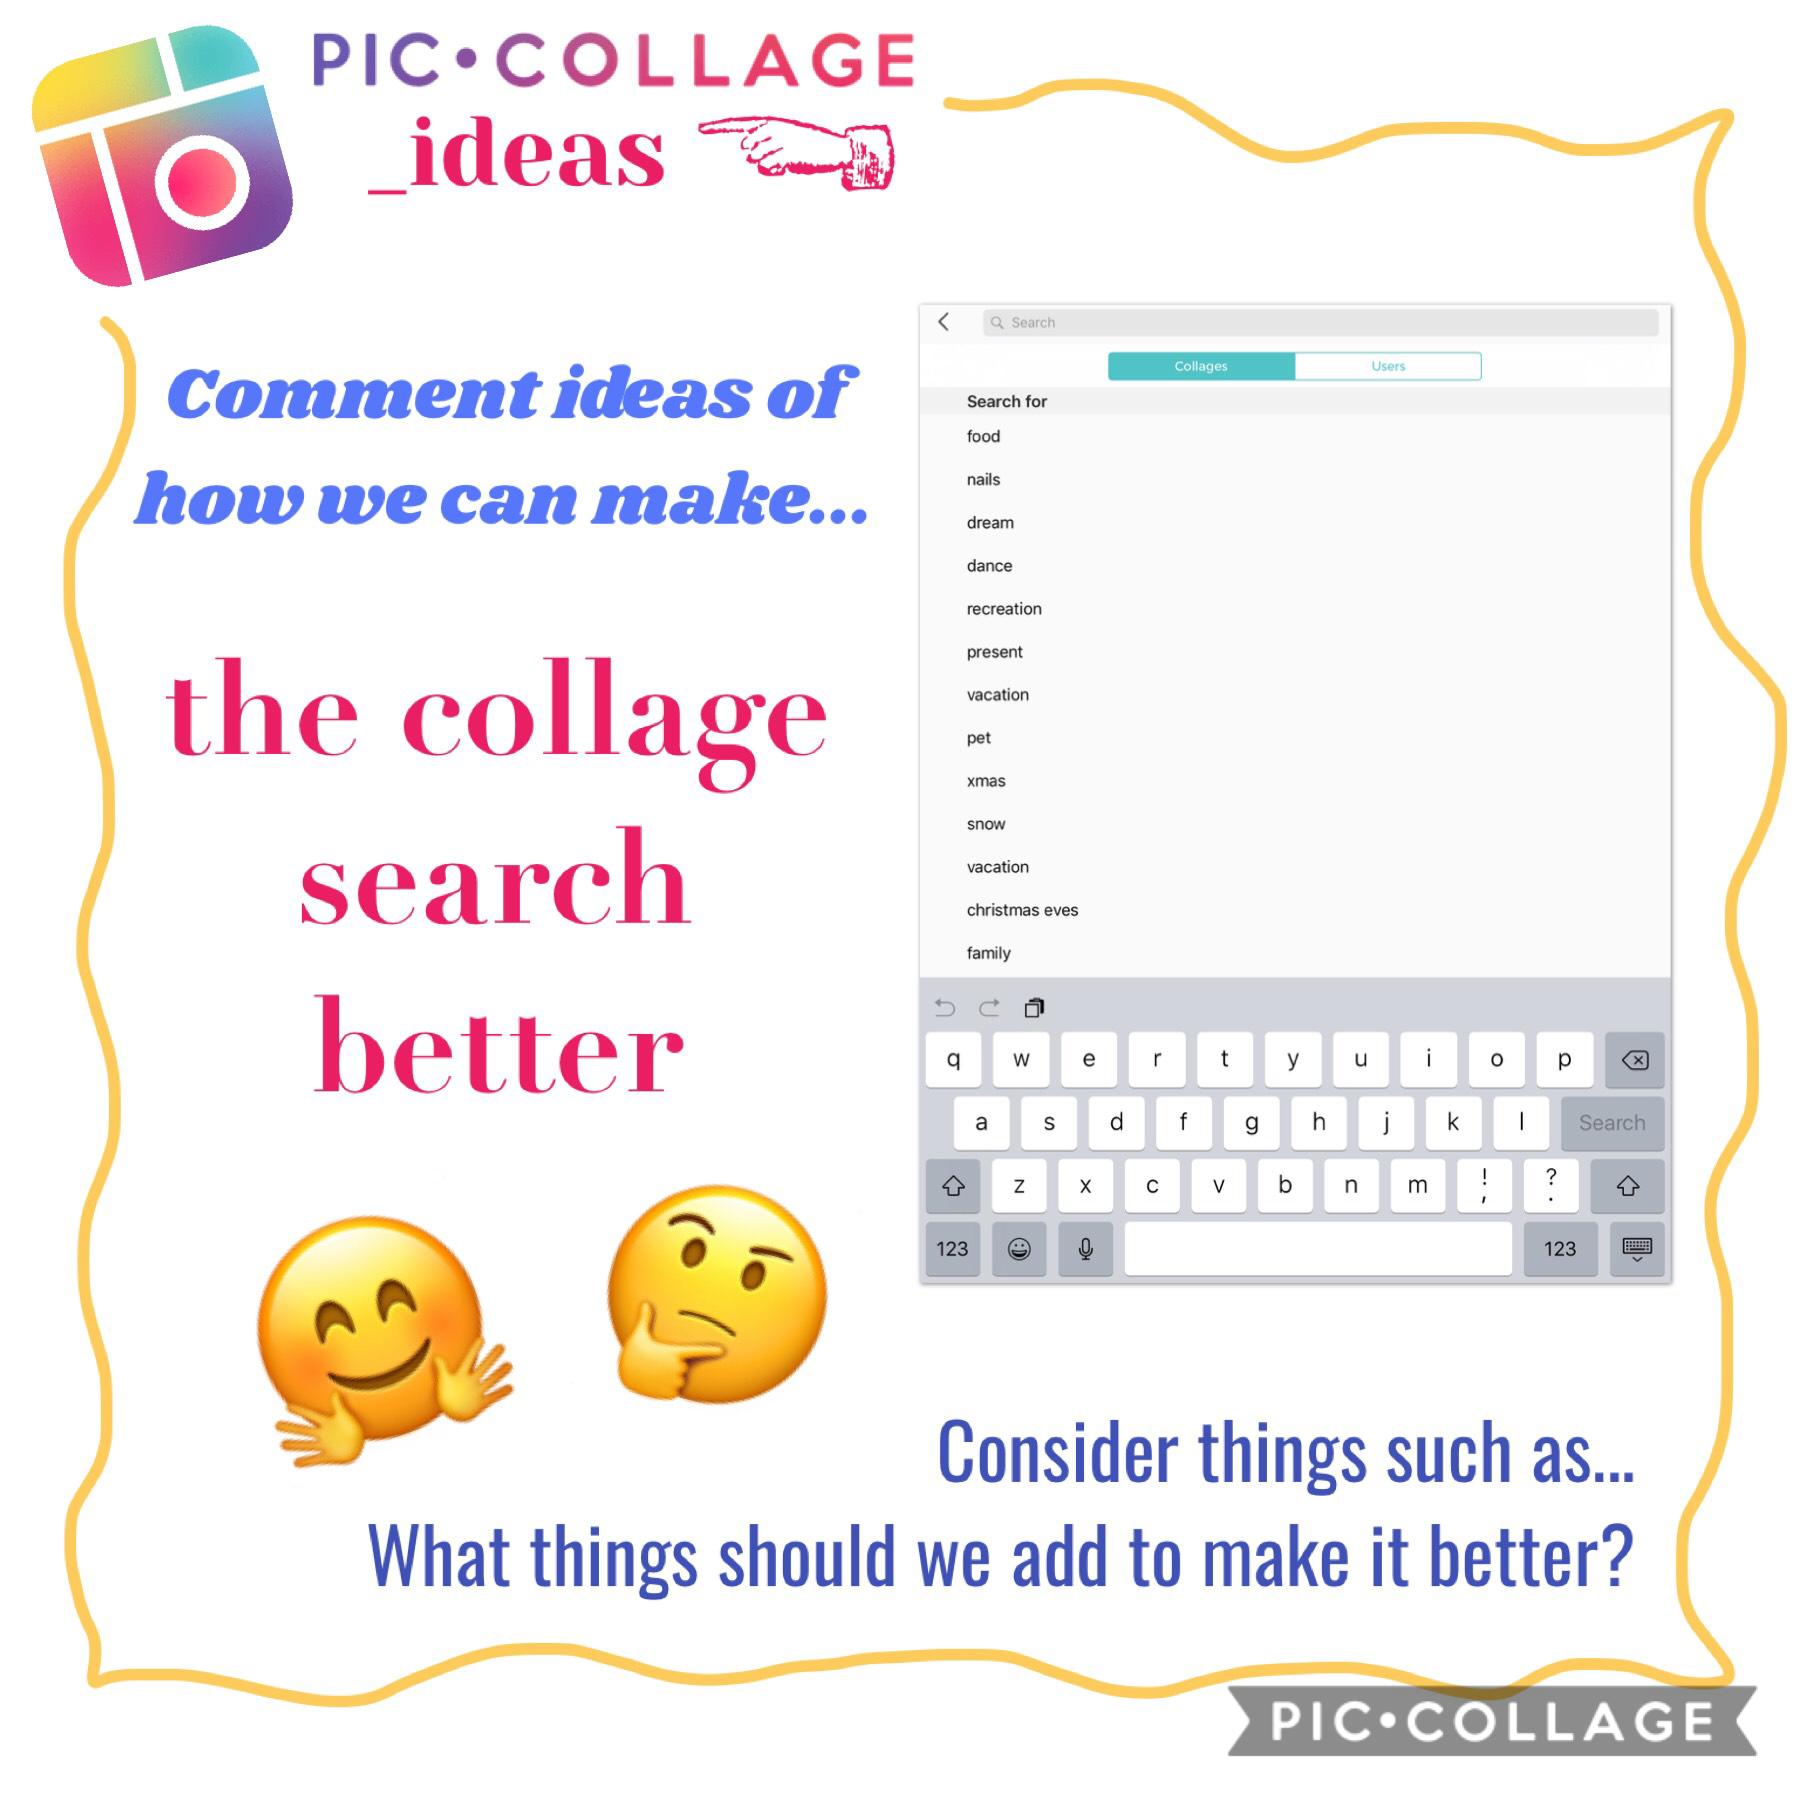 How can we make the collage search better?